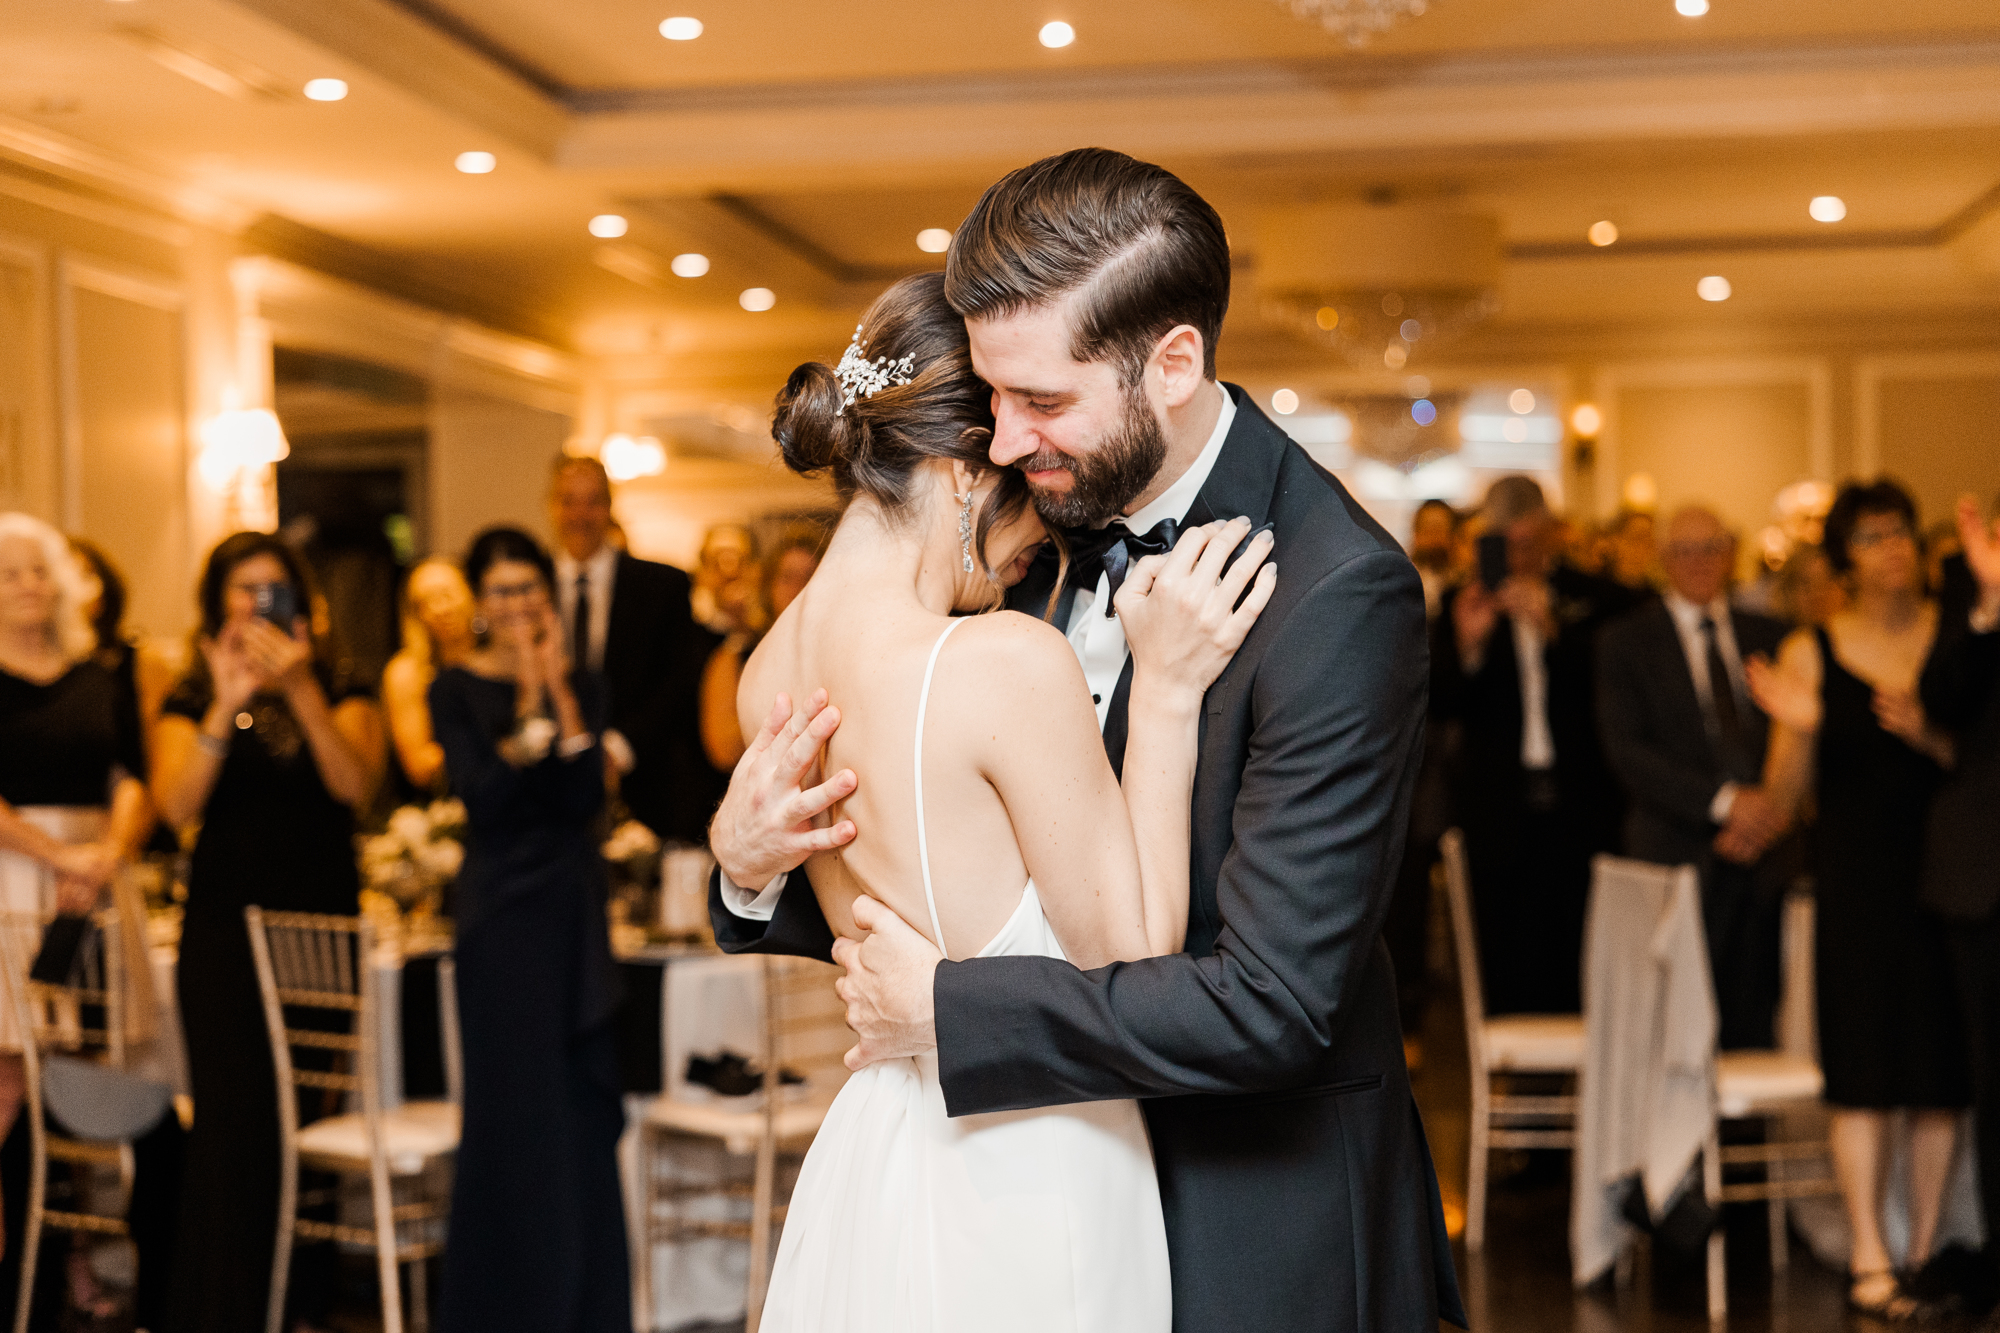 Awesome Private Last Dance New York Wedding Photos